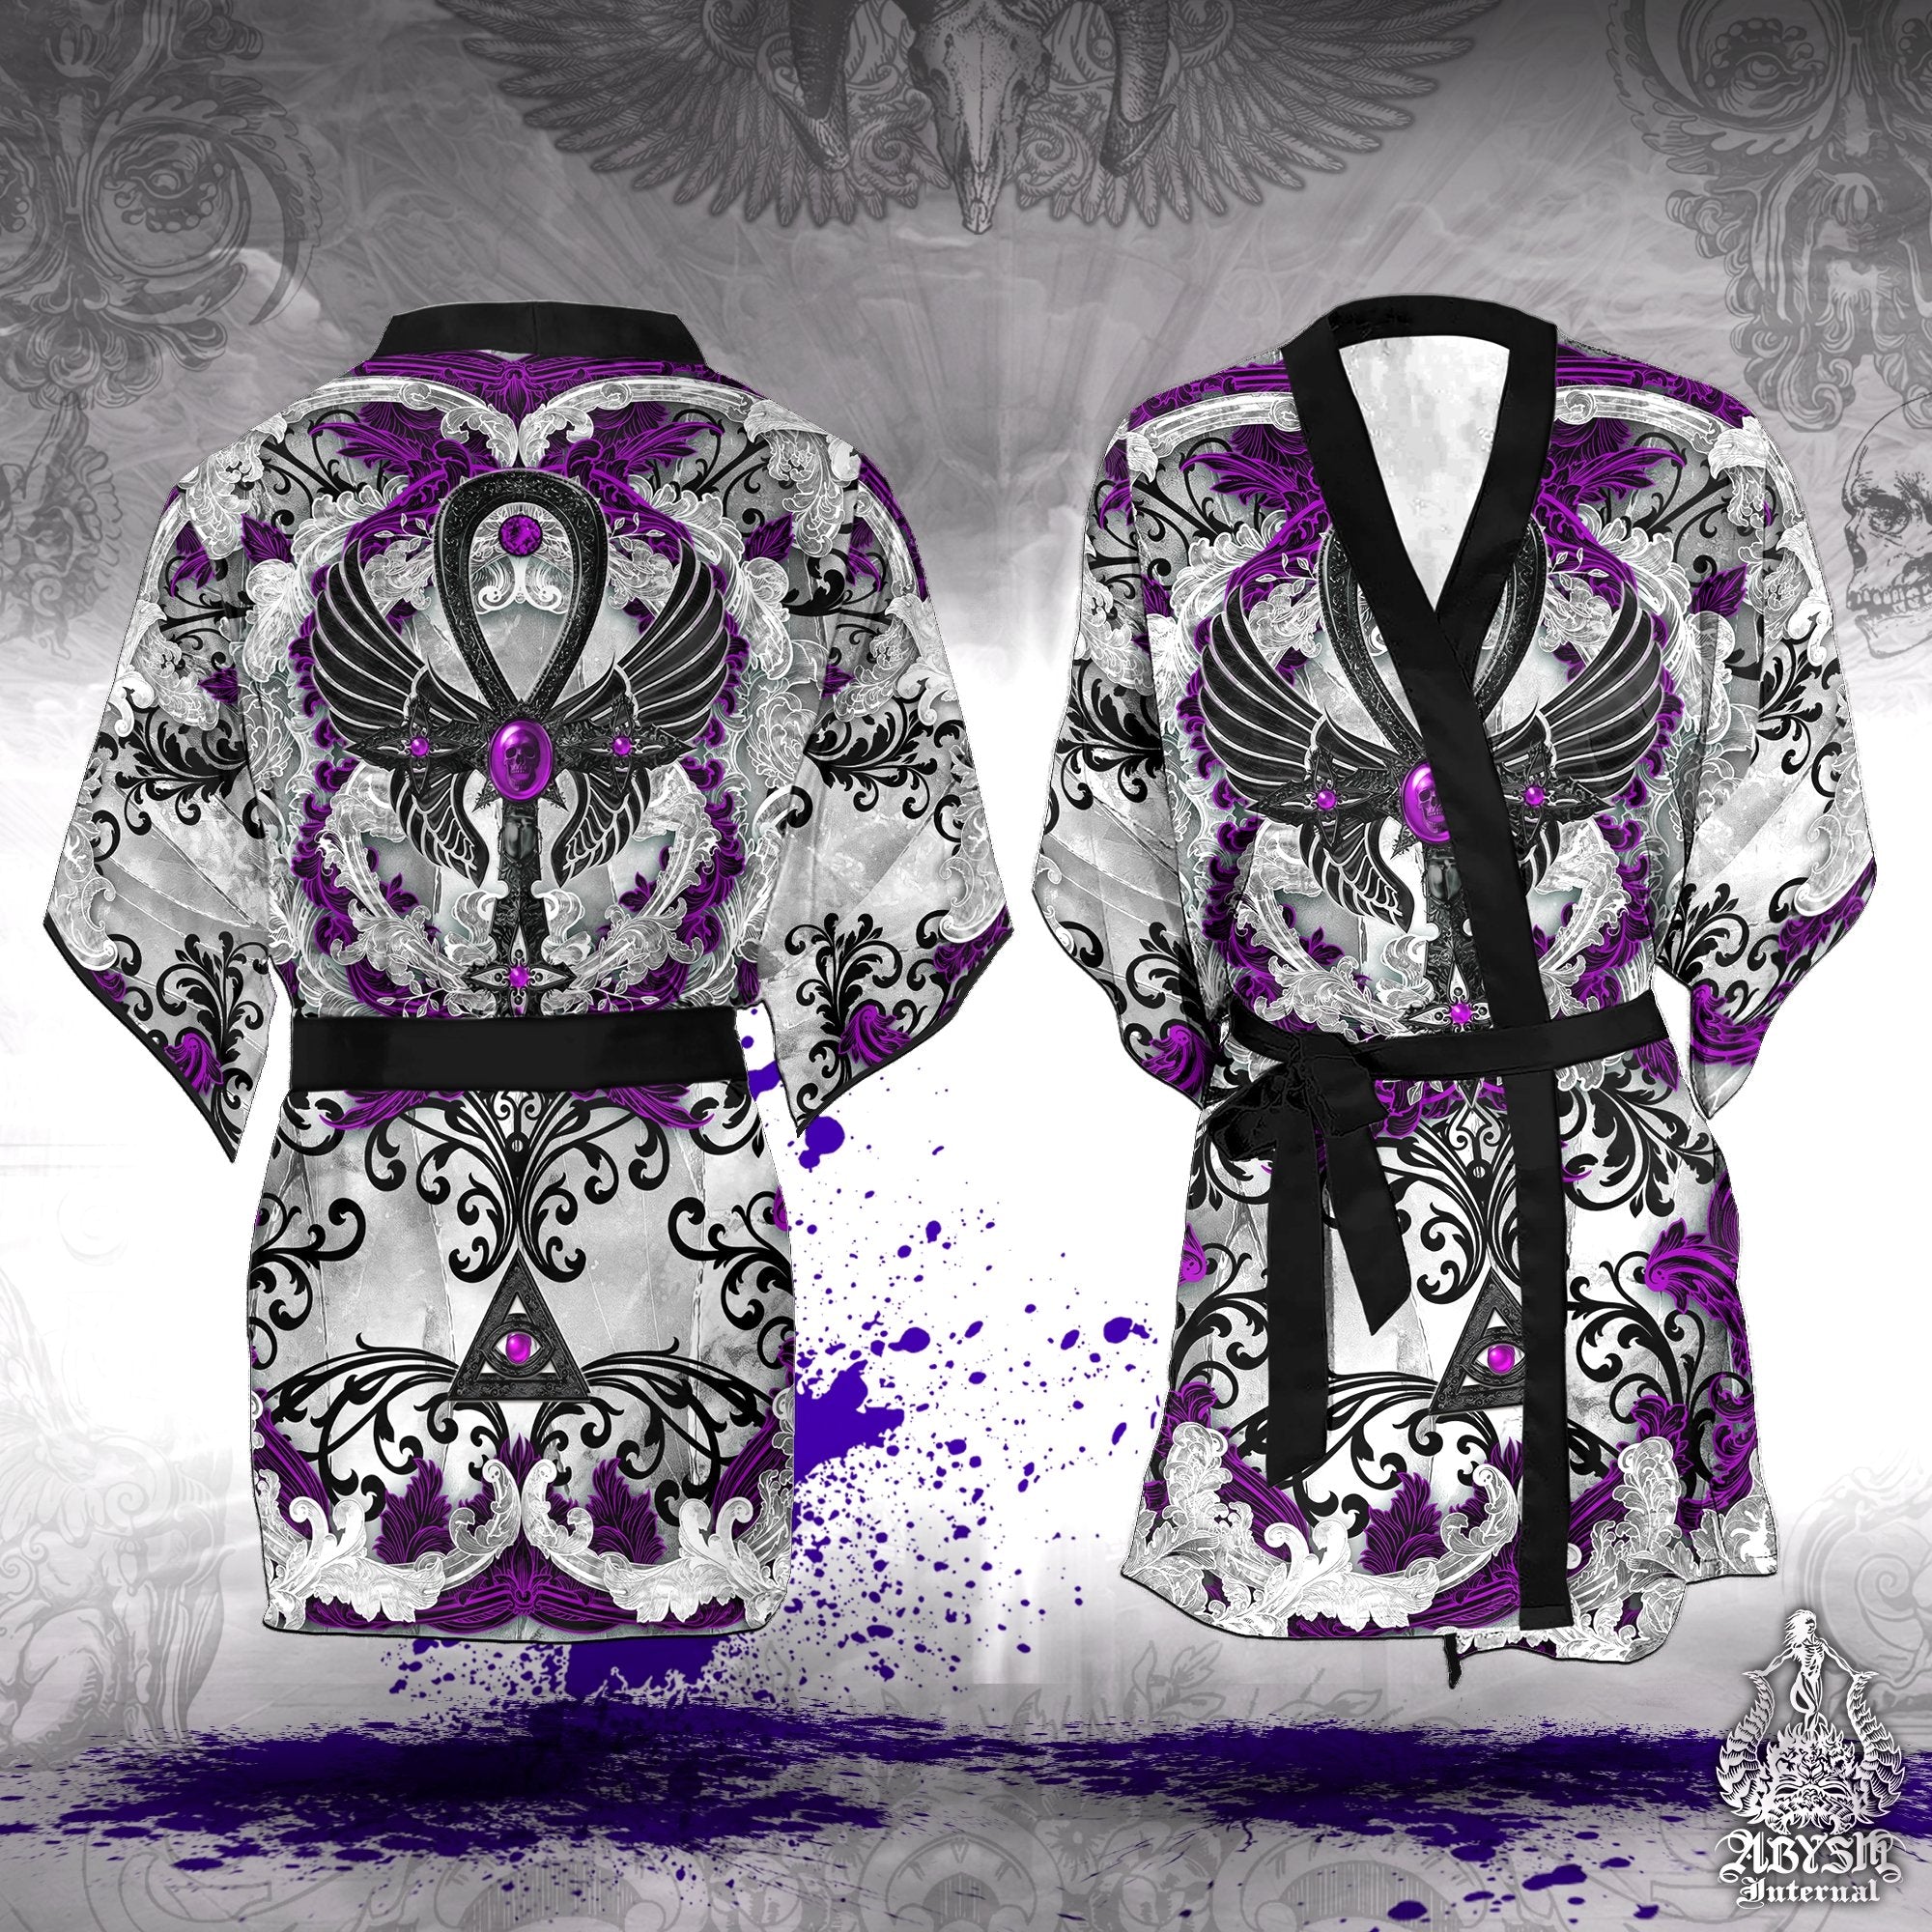 White Goth Cover Up, Beach Outfit, Party Kimono, Gothic Summer Festival Robe, Indie and Alternative Clothing, Unisex - Ankh, Black Purple - Abysm Internal